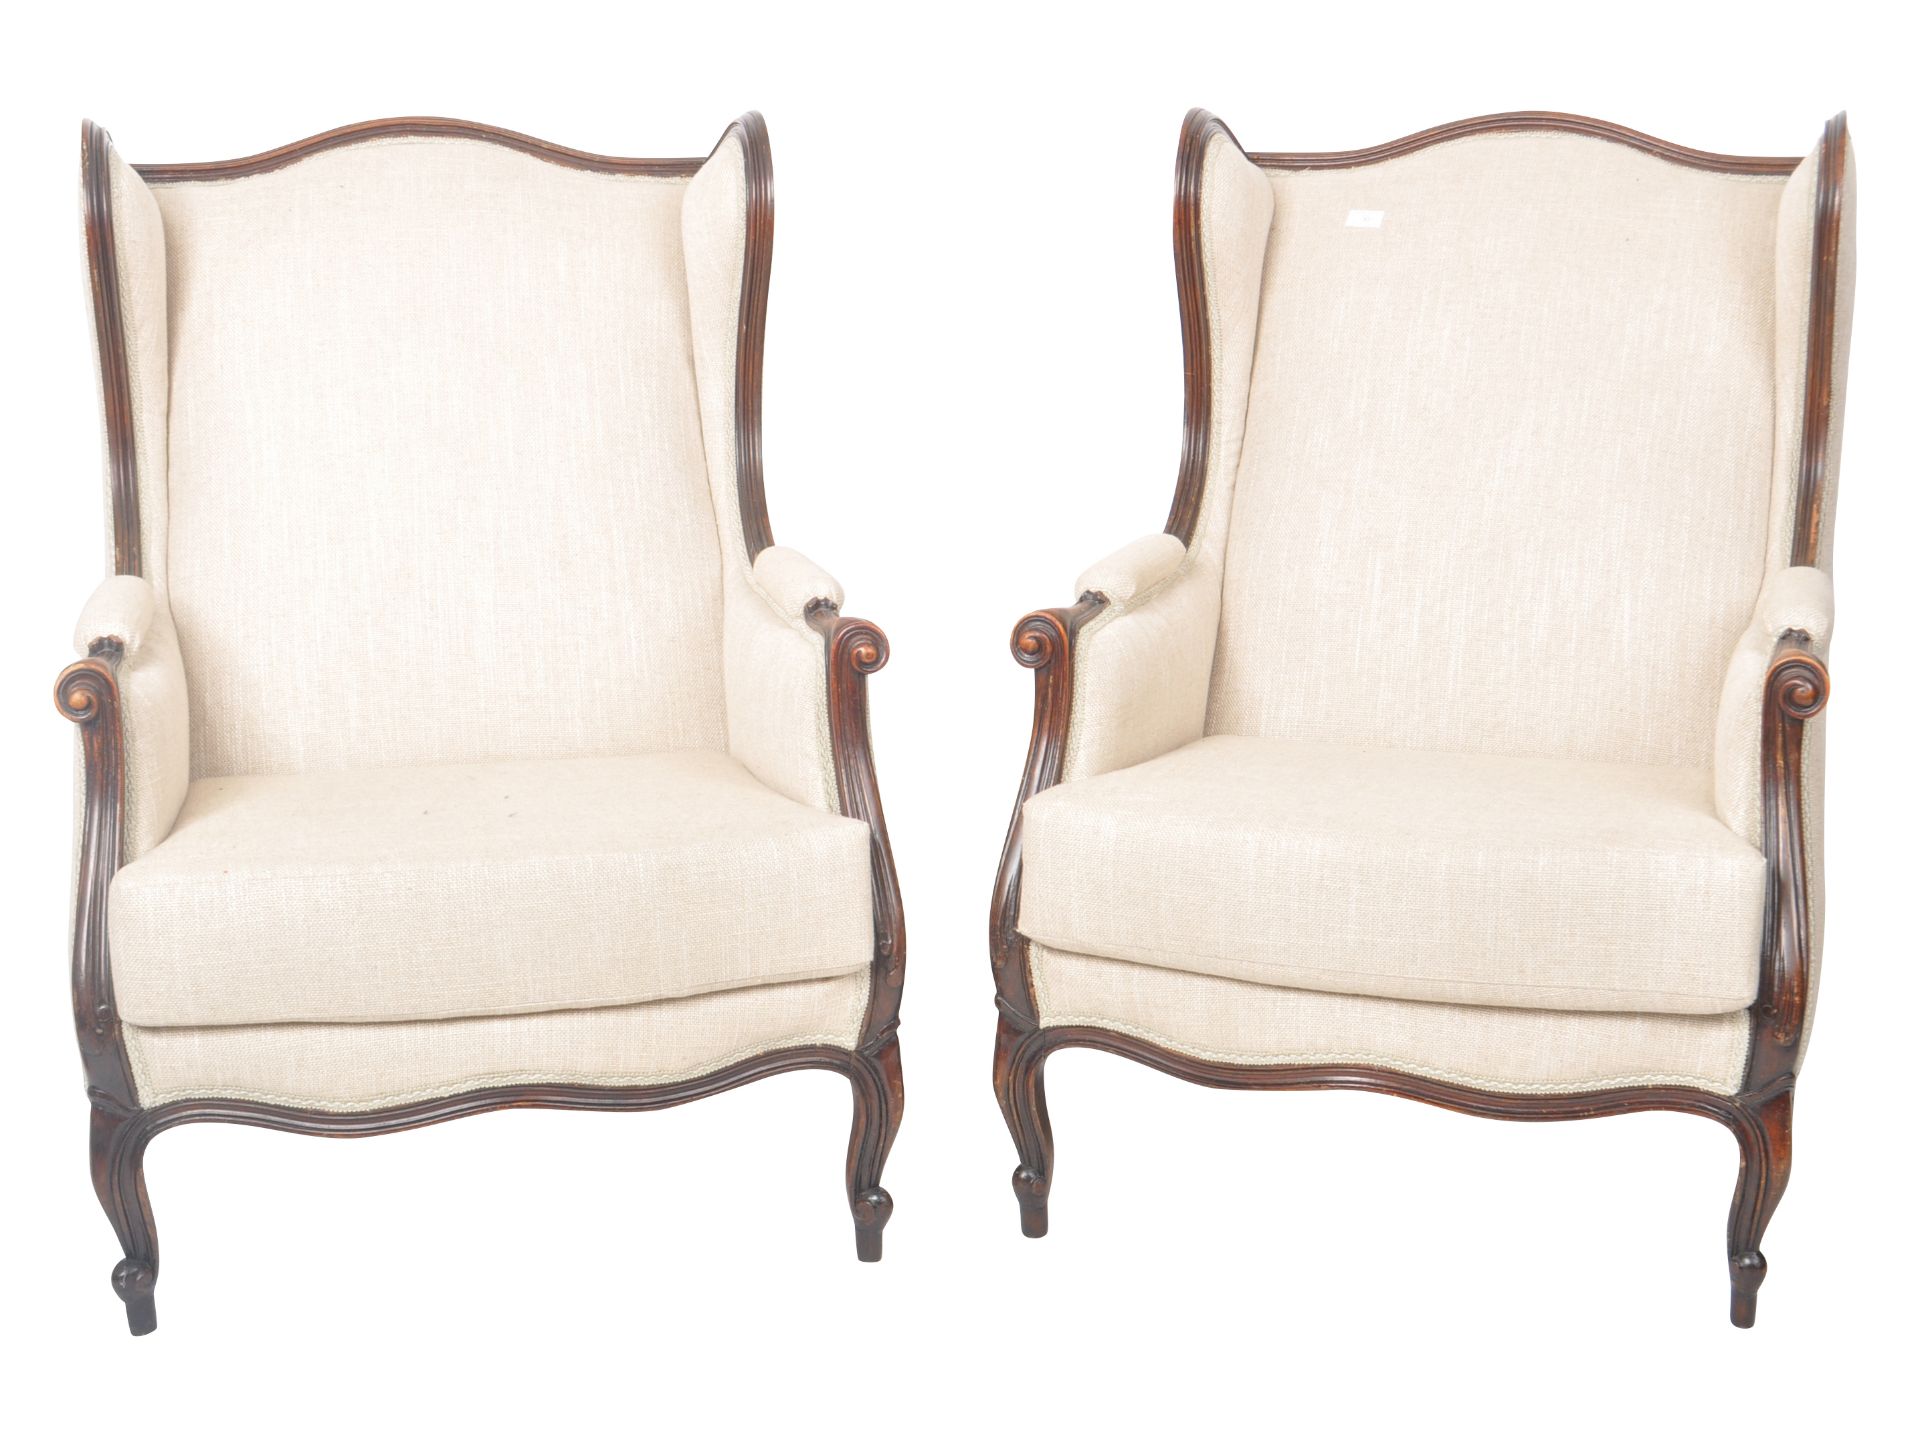 MATCHING PAIR OF 19TH CENTURY FRENCH WINGBACK ARMCHAIRS